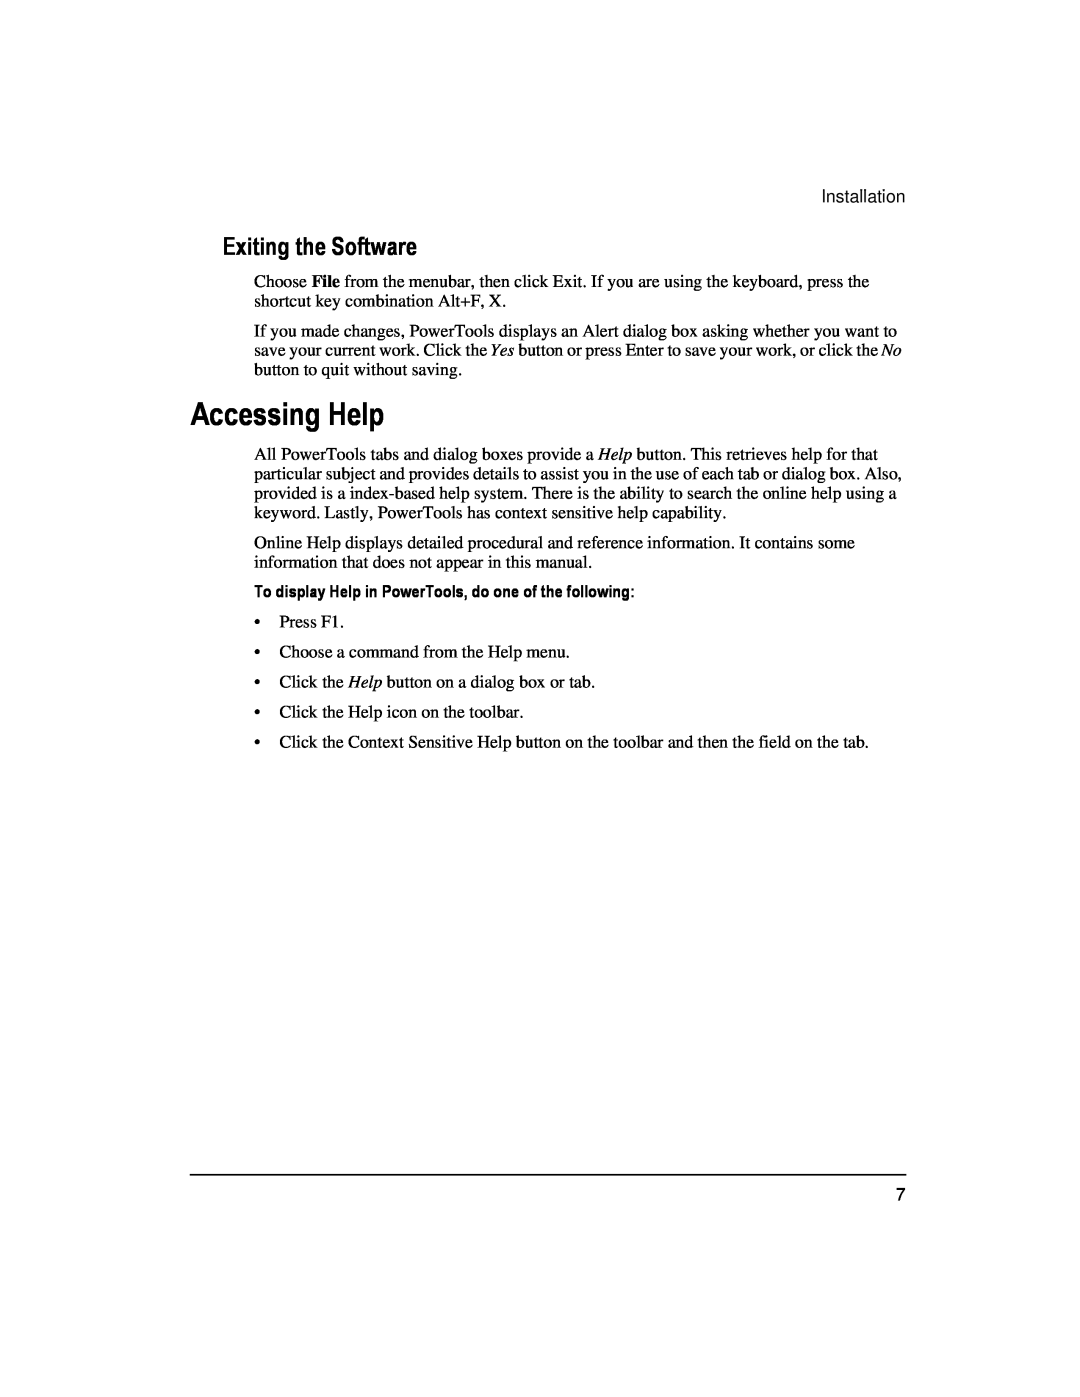 Emerson 400508-02 installation manual Accessing Help, Exiting the Software 